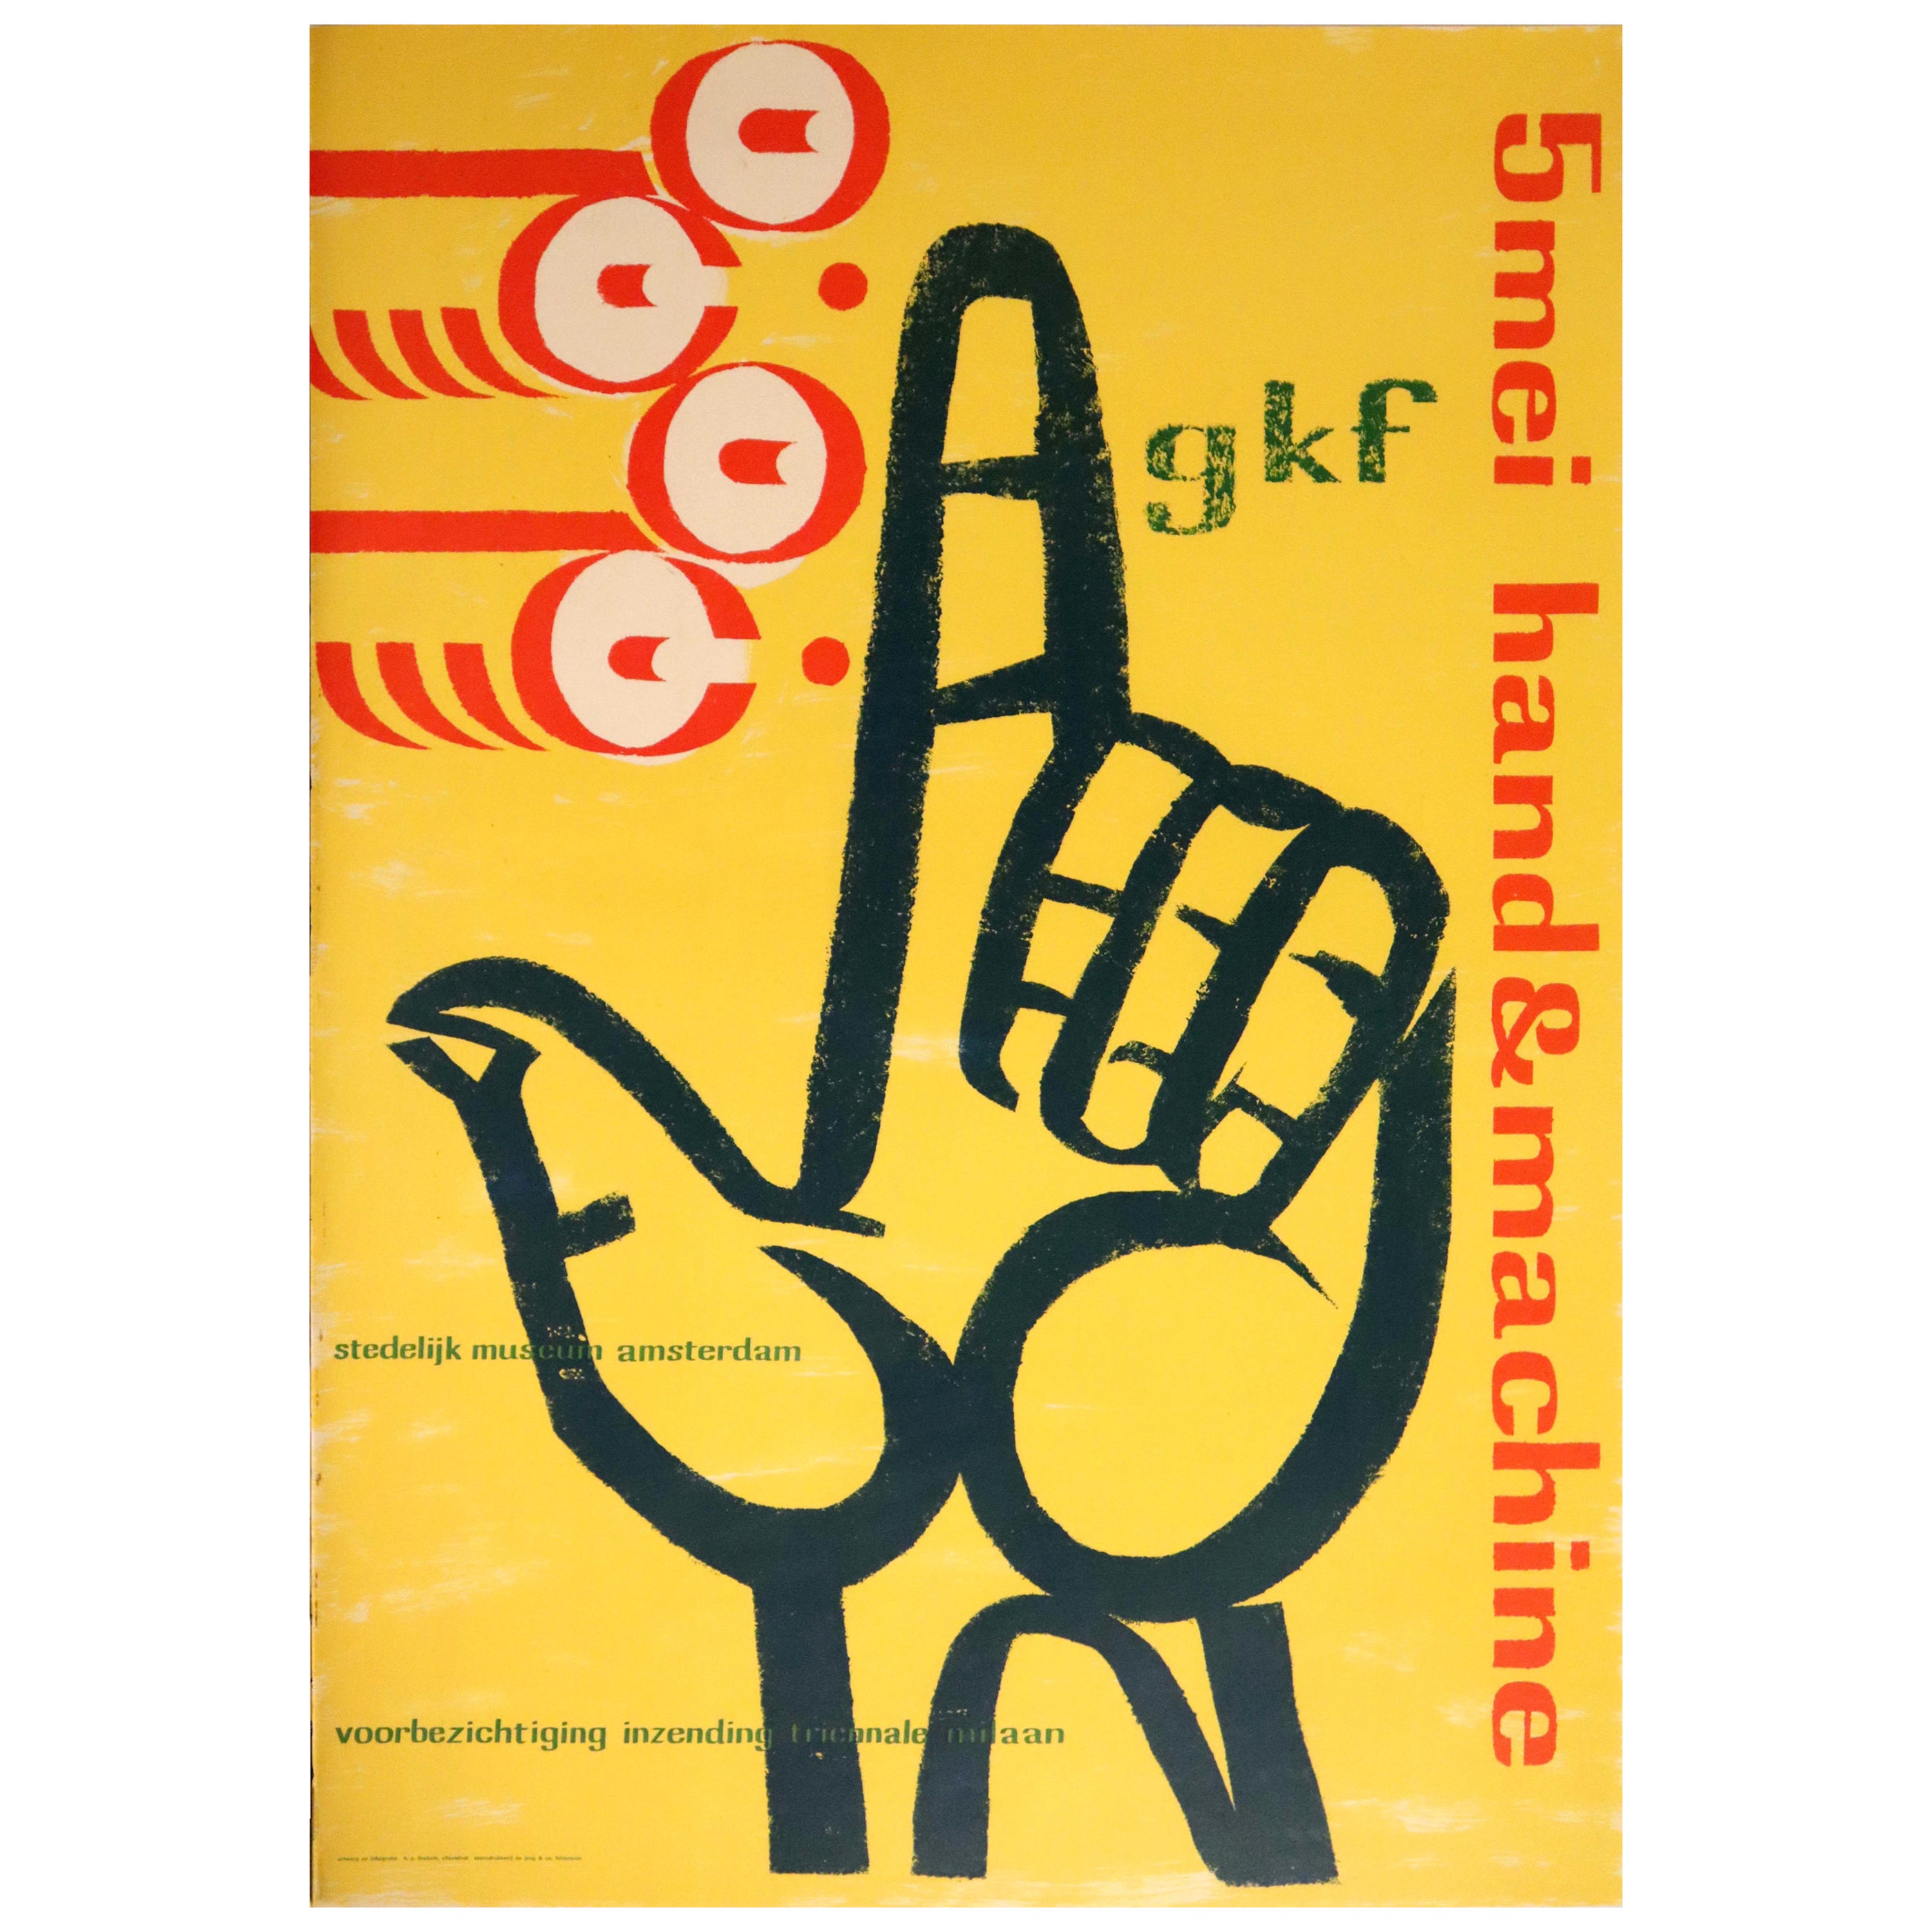 Original Vintage Poster For The GKF Exhibition Hand And Machine Stedelijk Museum For Sale